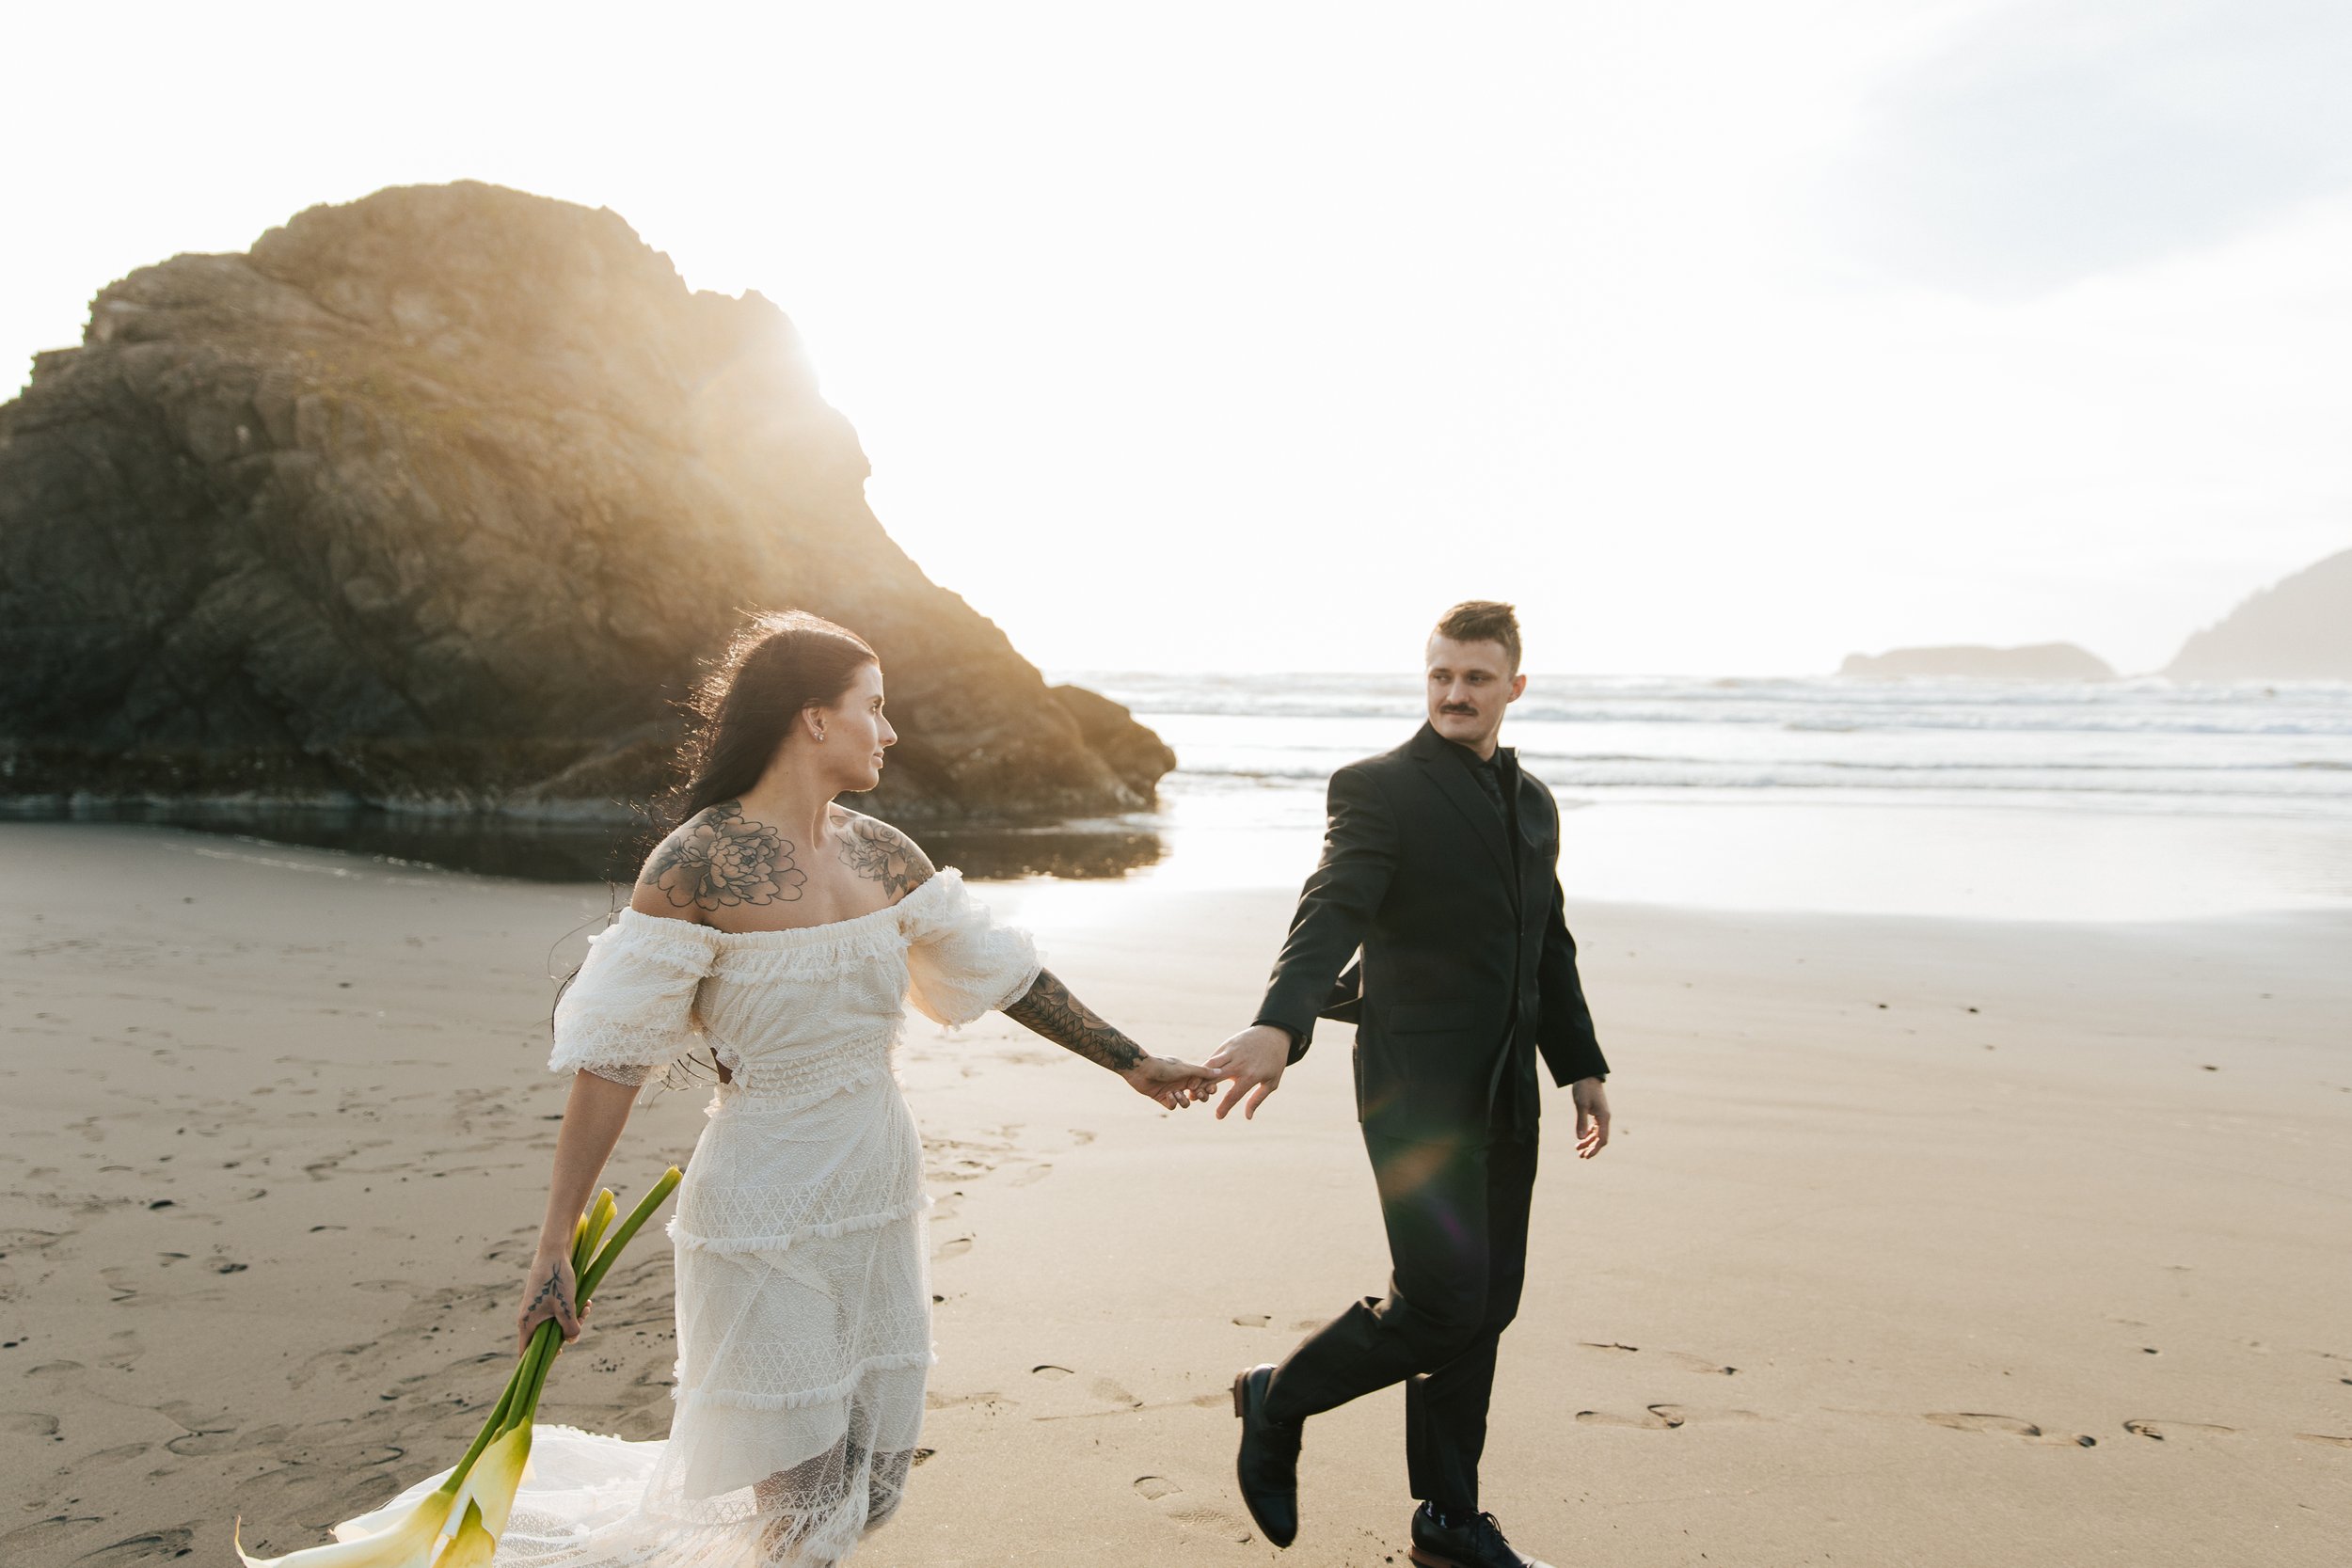  Oregon coast elopement. Couple elopes on the beach with the sun shining behind them. Sun rays behind rocks. Beach with rocks and haystacks. Southern Oregon. Couple walking together holding hands. Brookings, Oregon. Samuel H Boardman elopement. #oreg